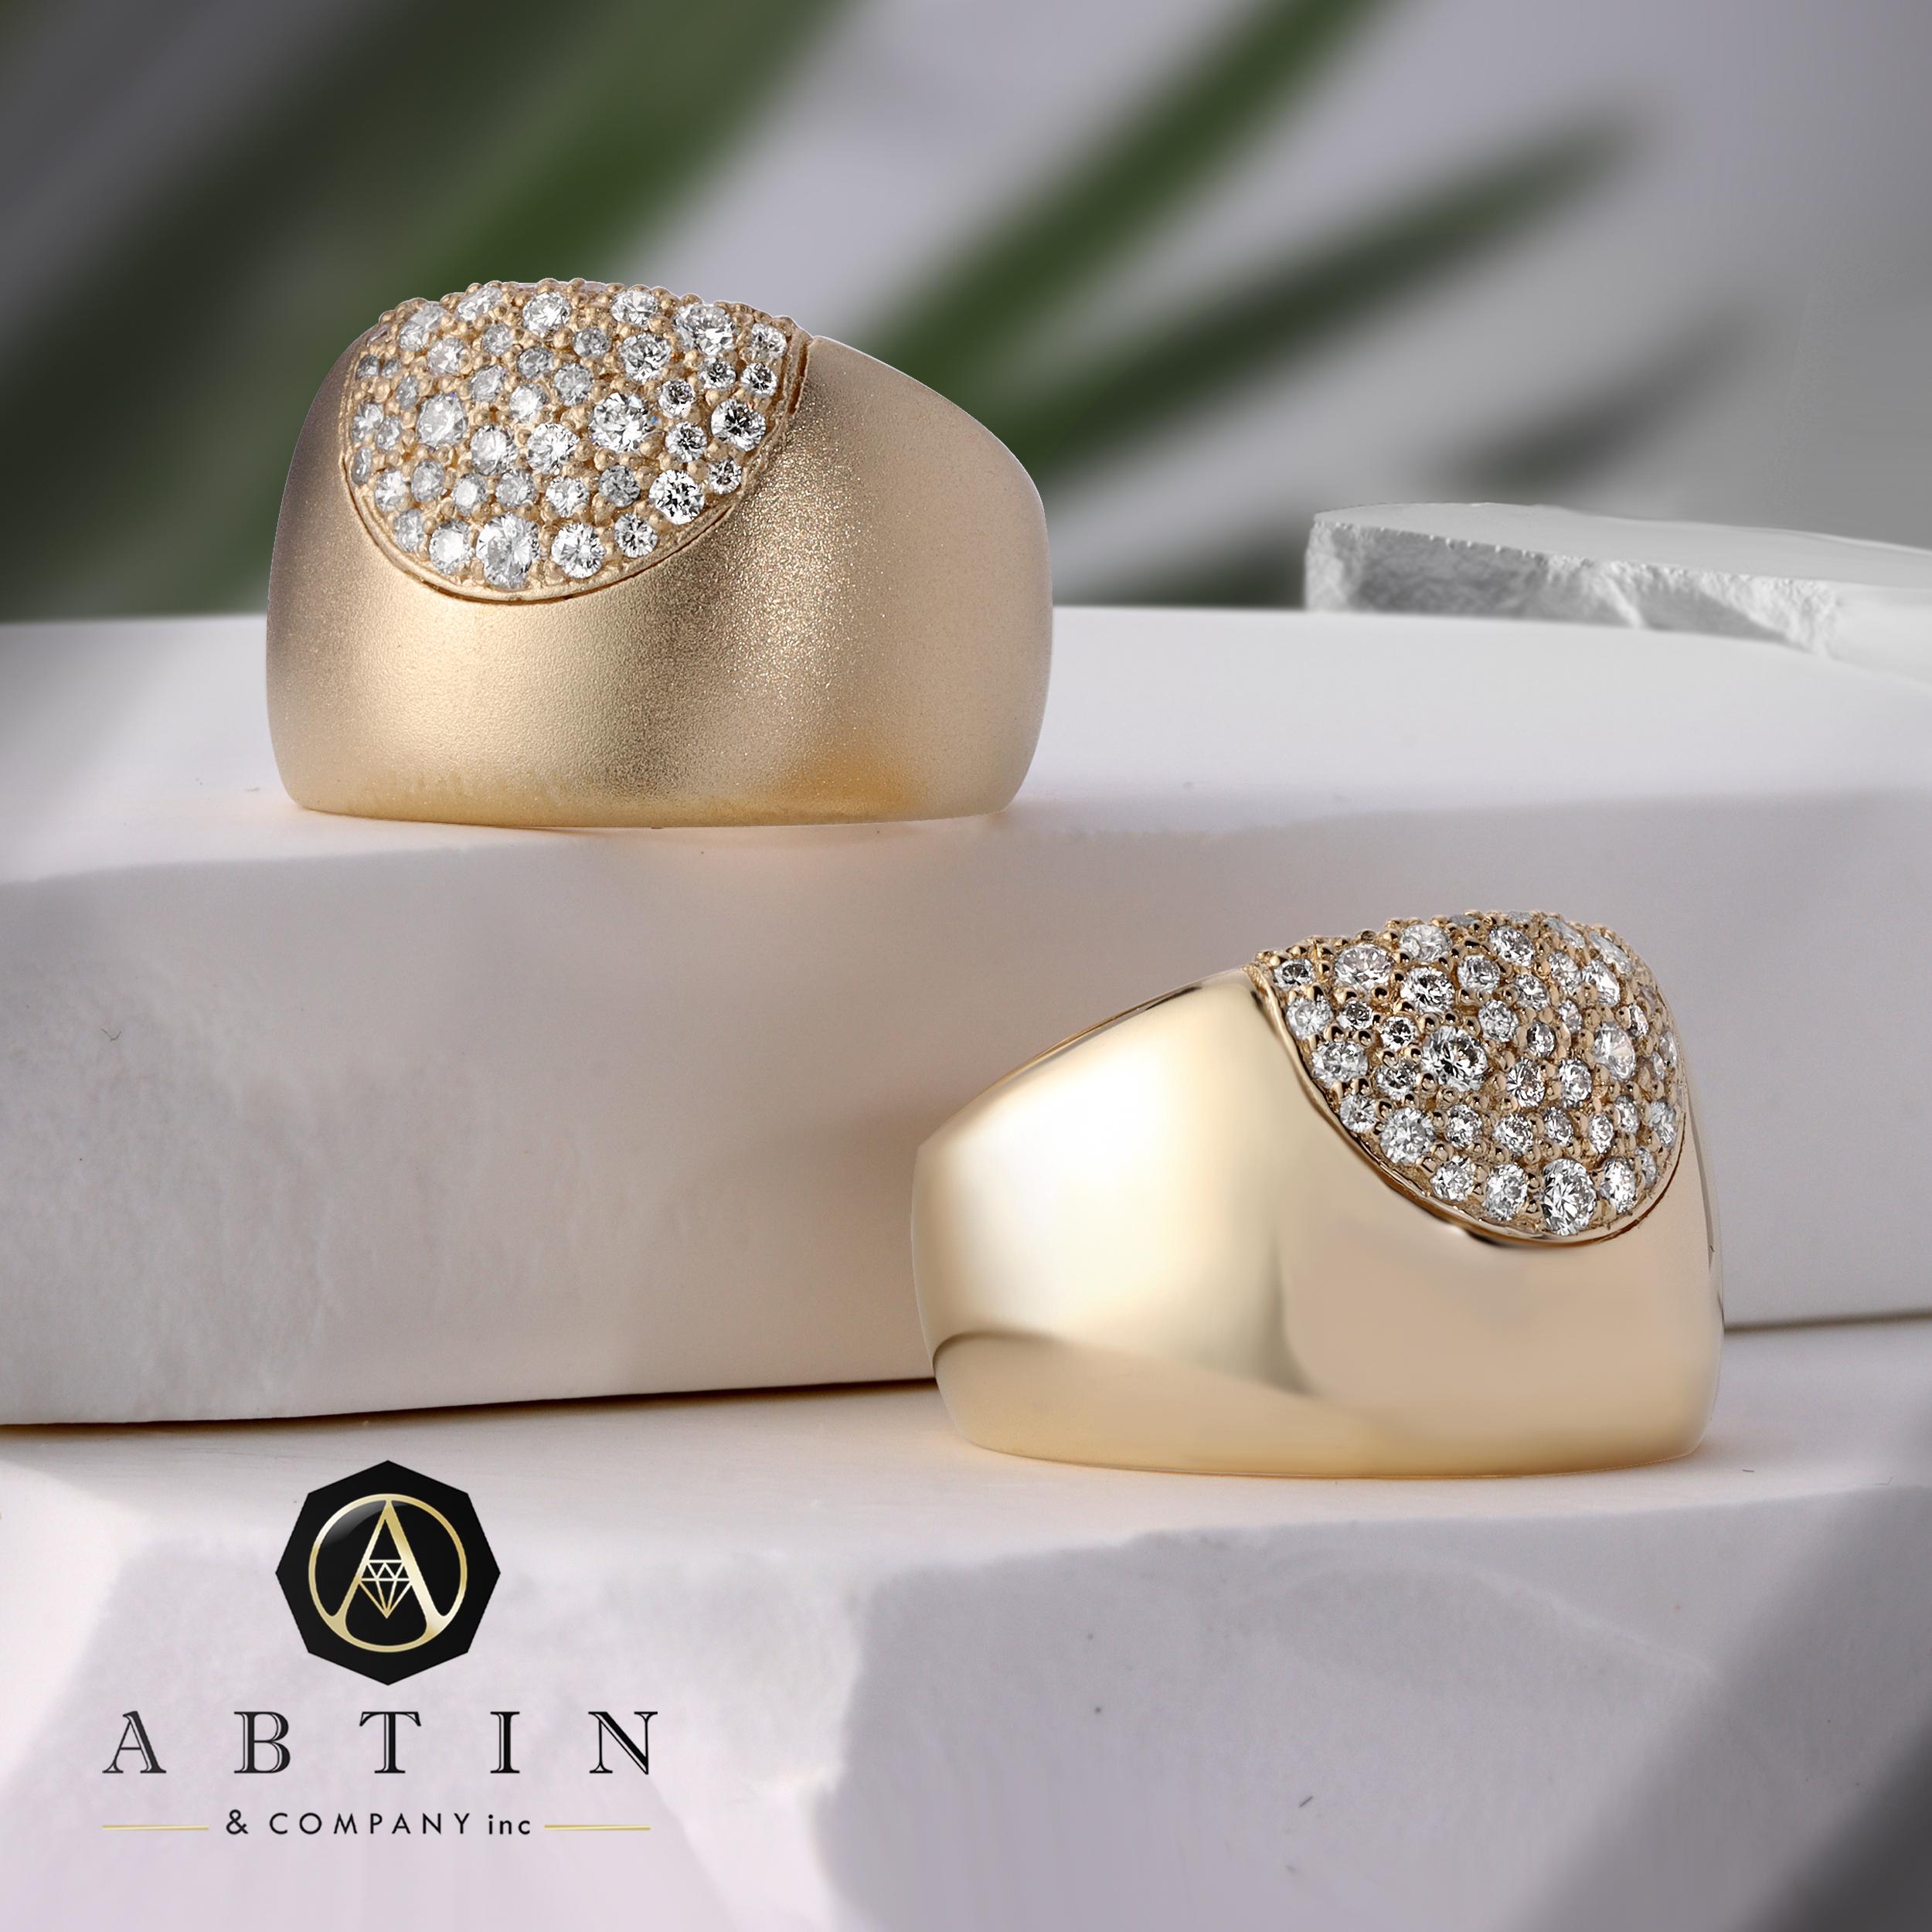 Crafted in 14K gold, this exquisite ring features a dome design and a dazzling arrangement of 0.53 carats of glistening diamonds. Its high-domed design sparkles with round brilliant-cut diamonds set on matt polished gold. This statement ring is a